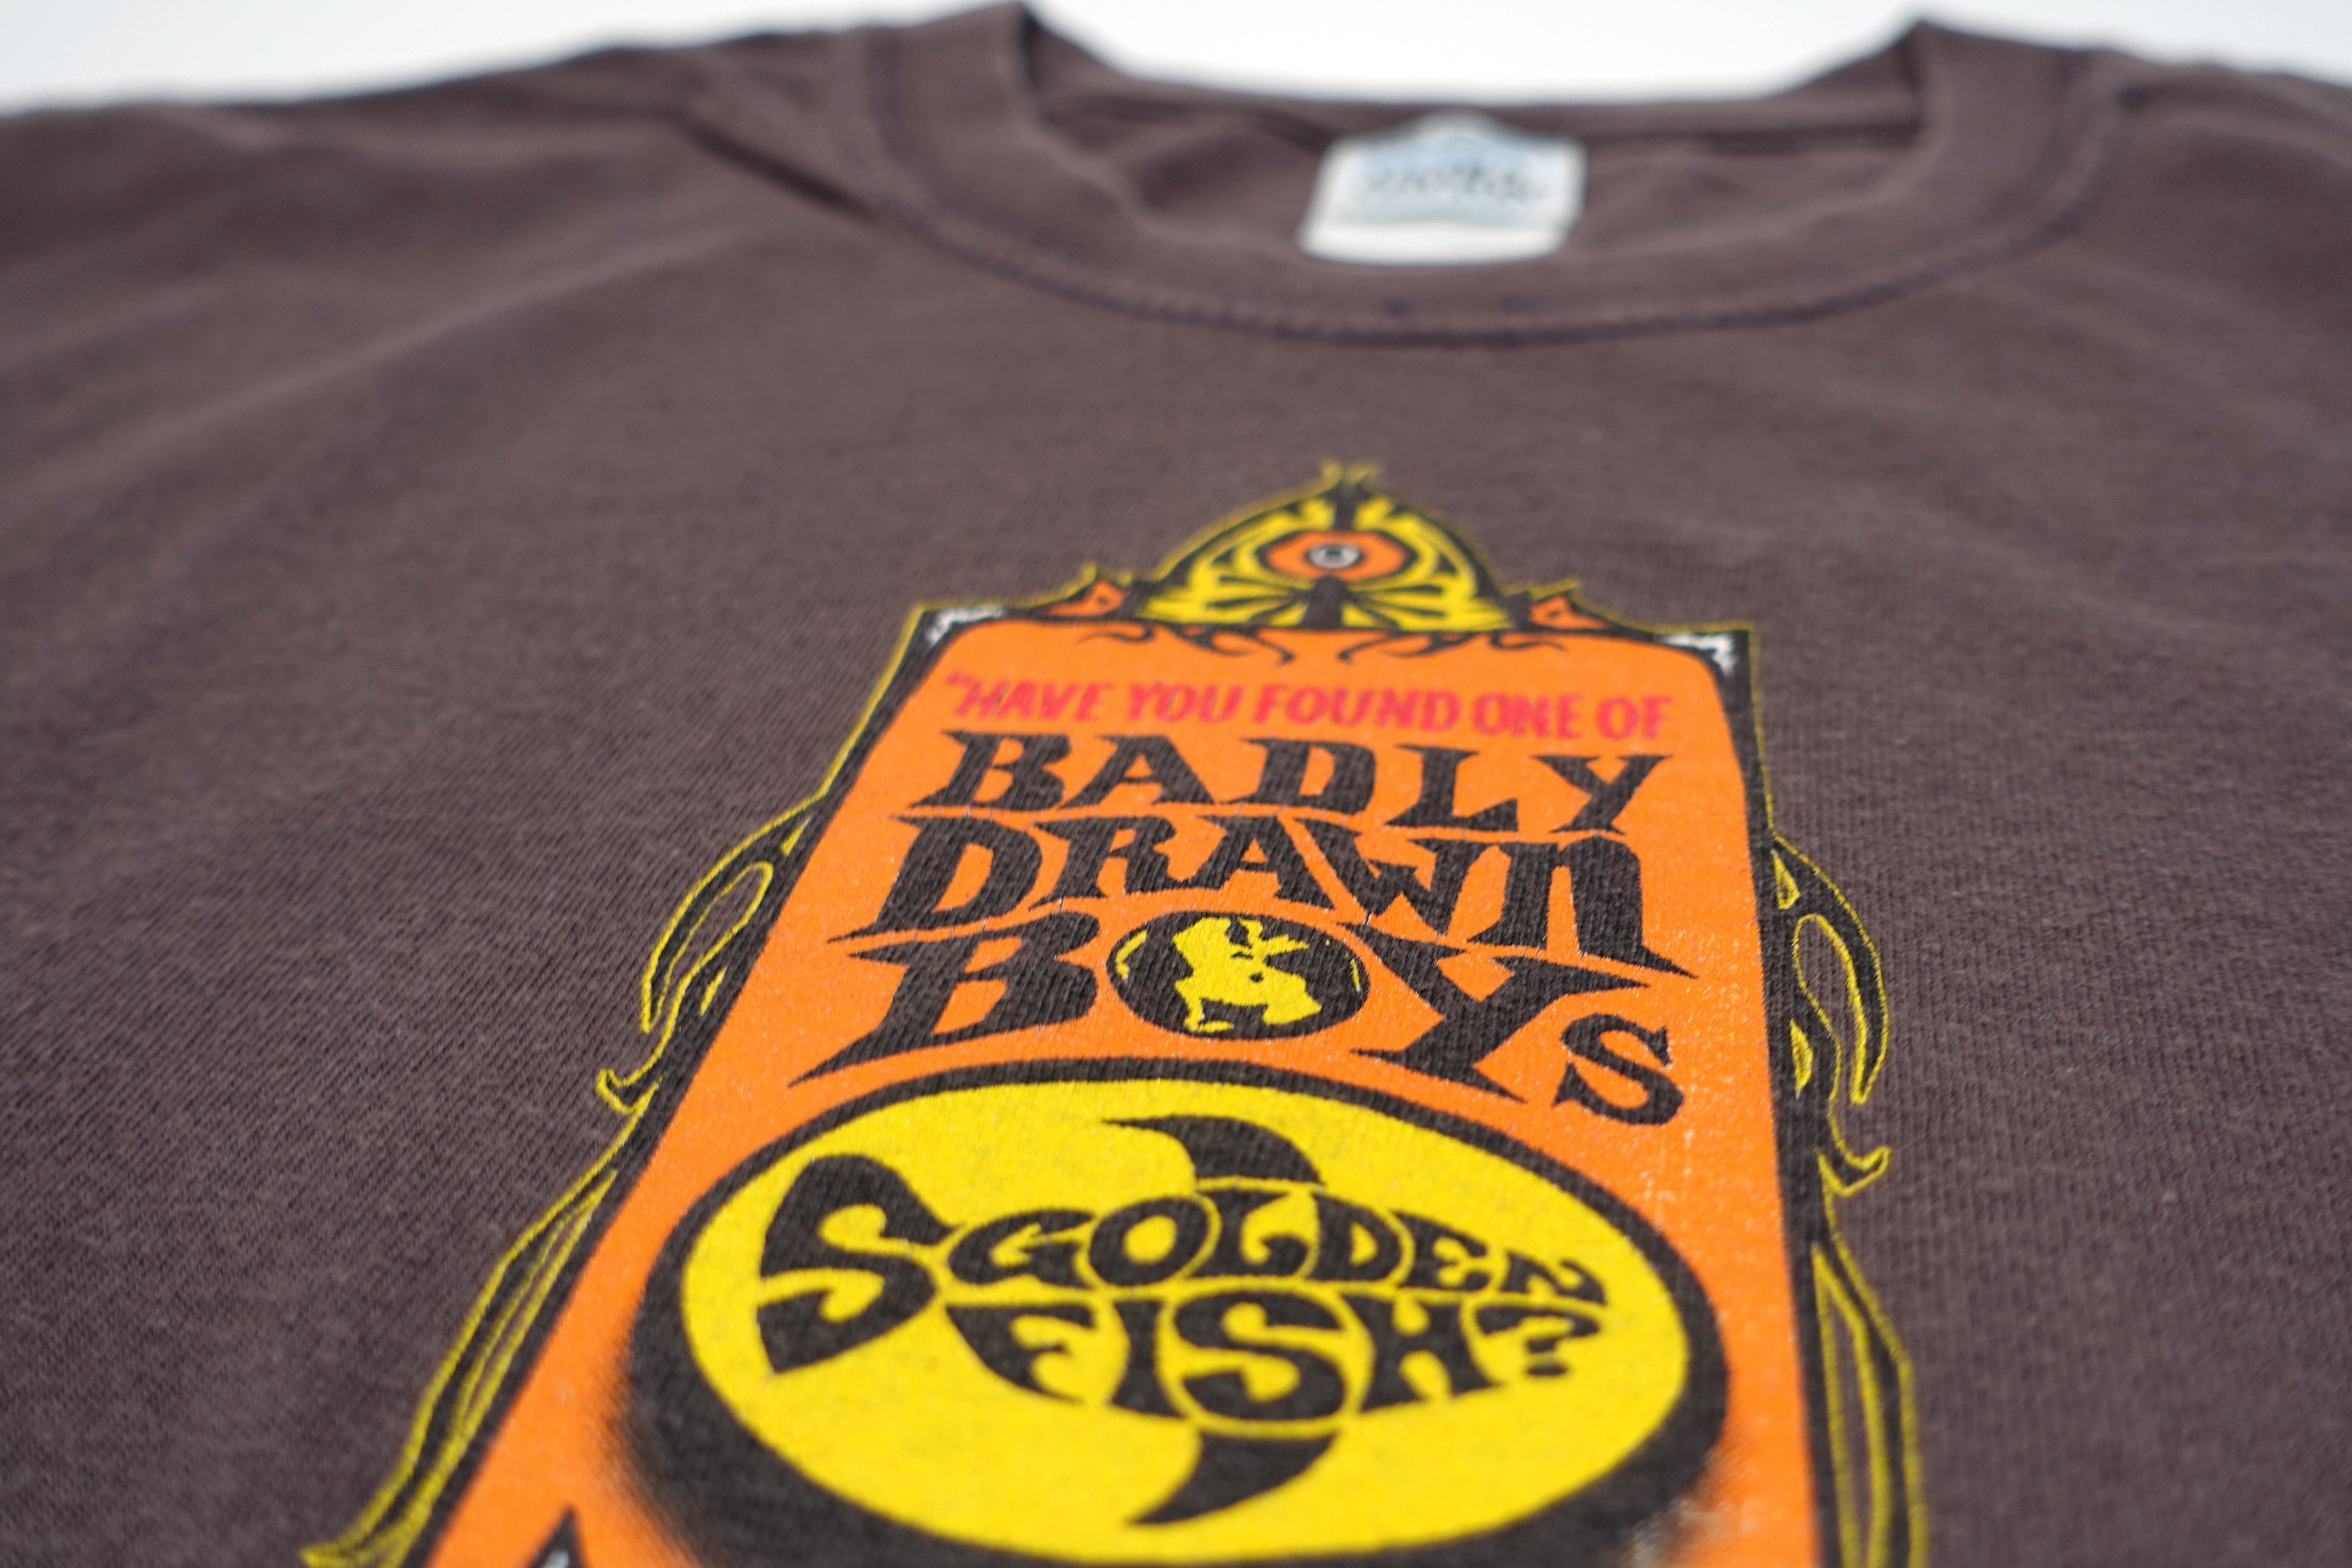 Badly Drawn Boy – Have You Fed The Fish? 2002 Tour Shirt Size XL